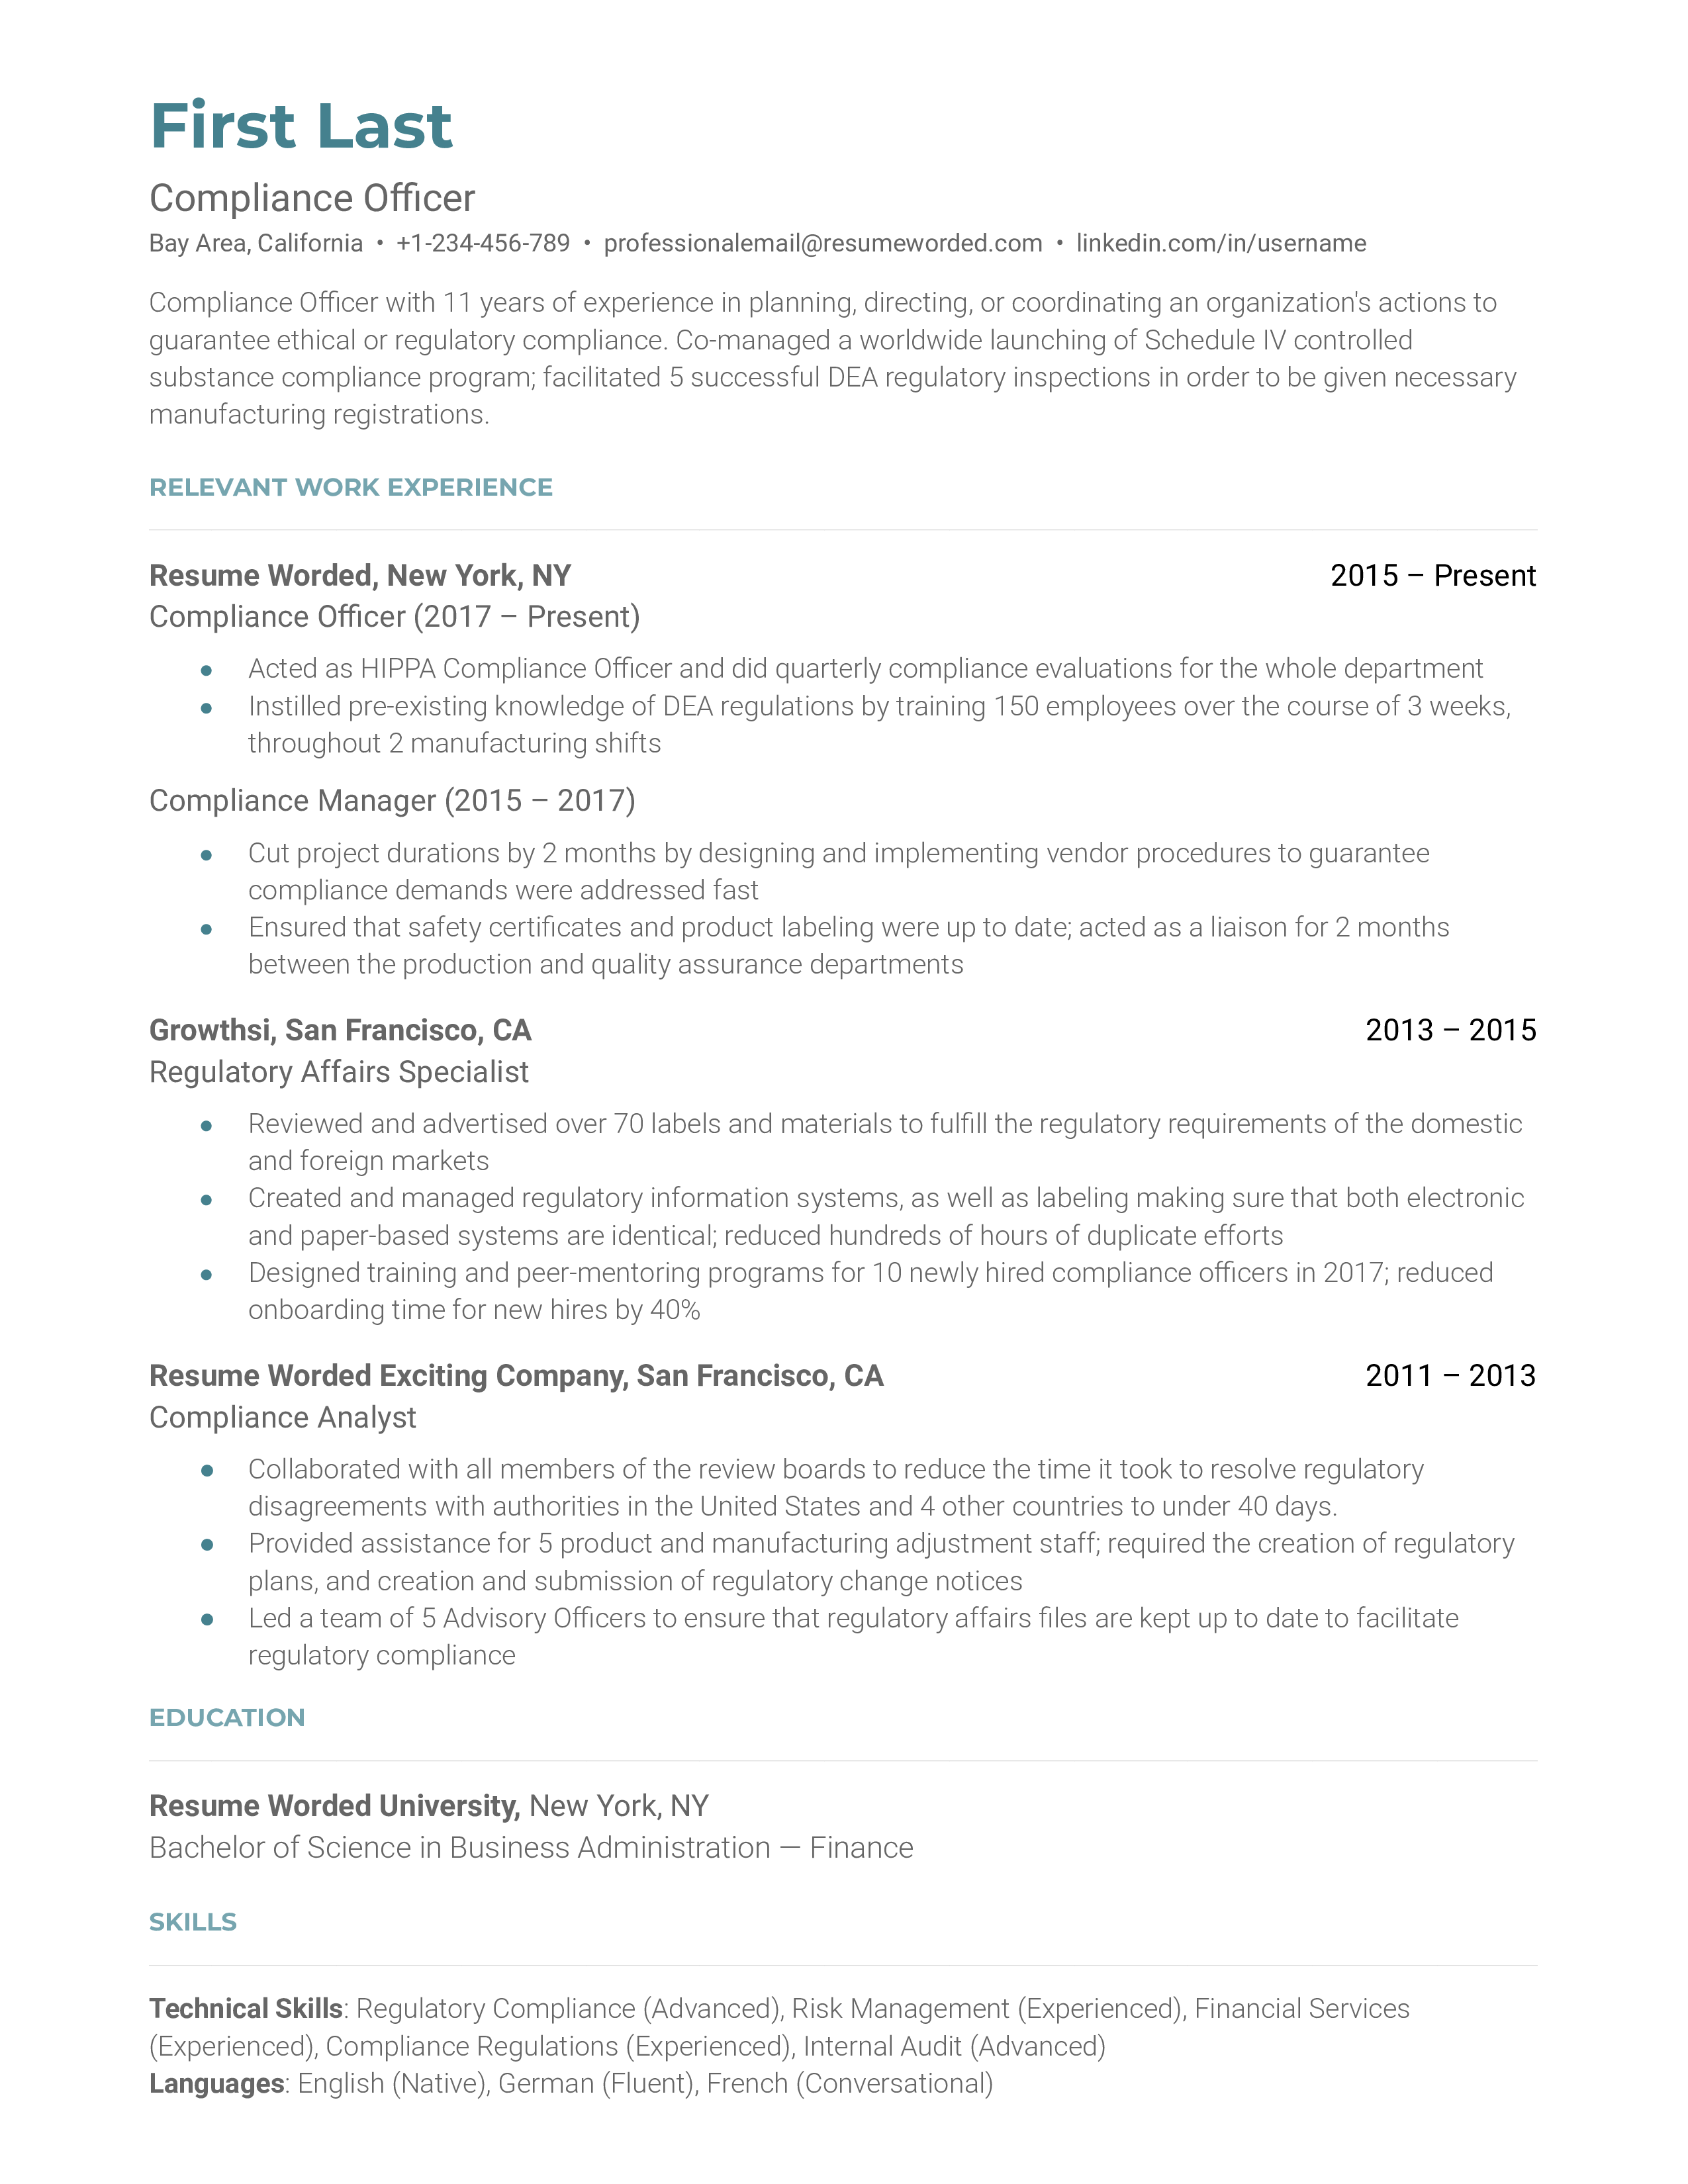 Compliance officer resume example